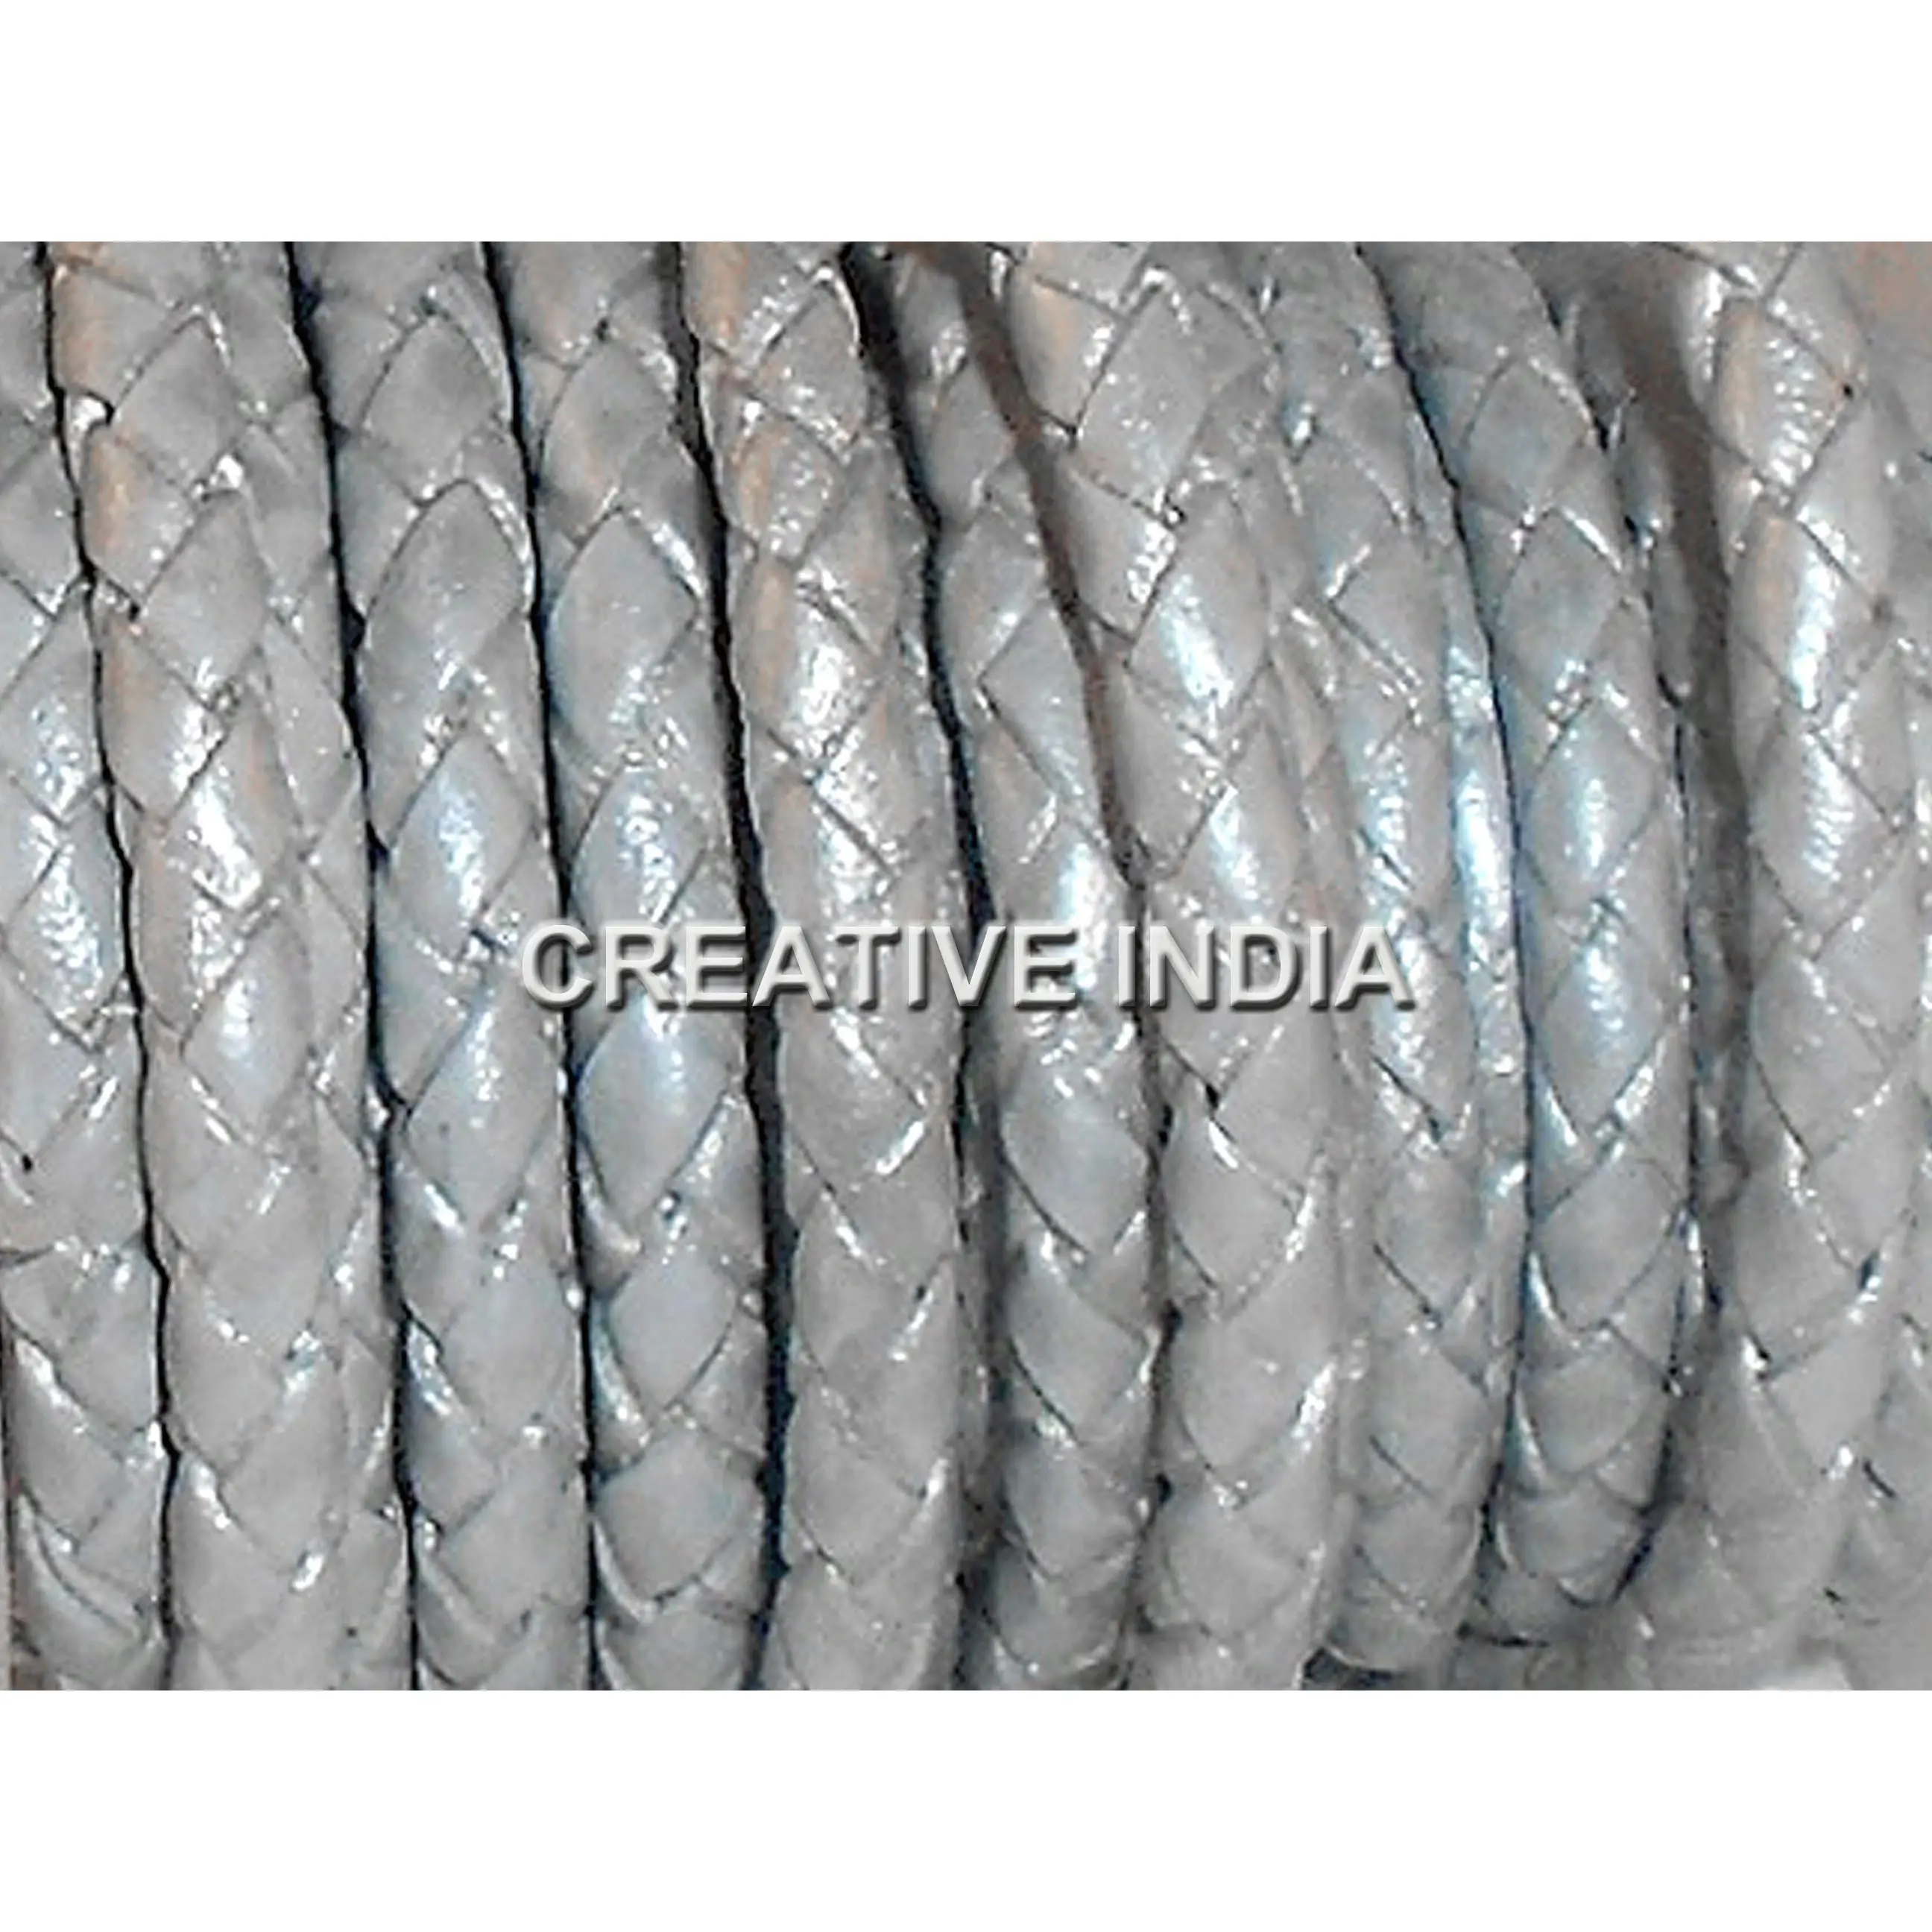 New Trendy Metallic Leather Cord Braided Round Cord Wholesale for Bulk Purchase Genuine Leather